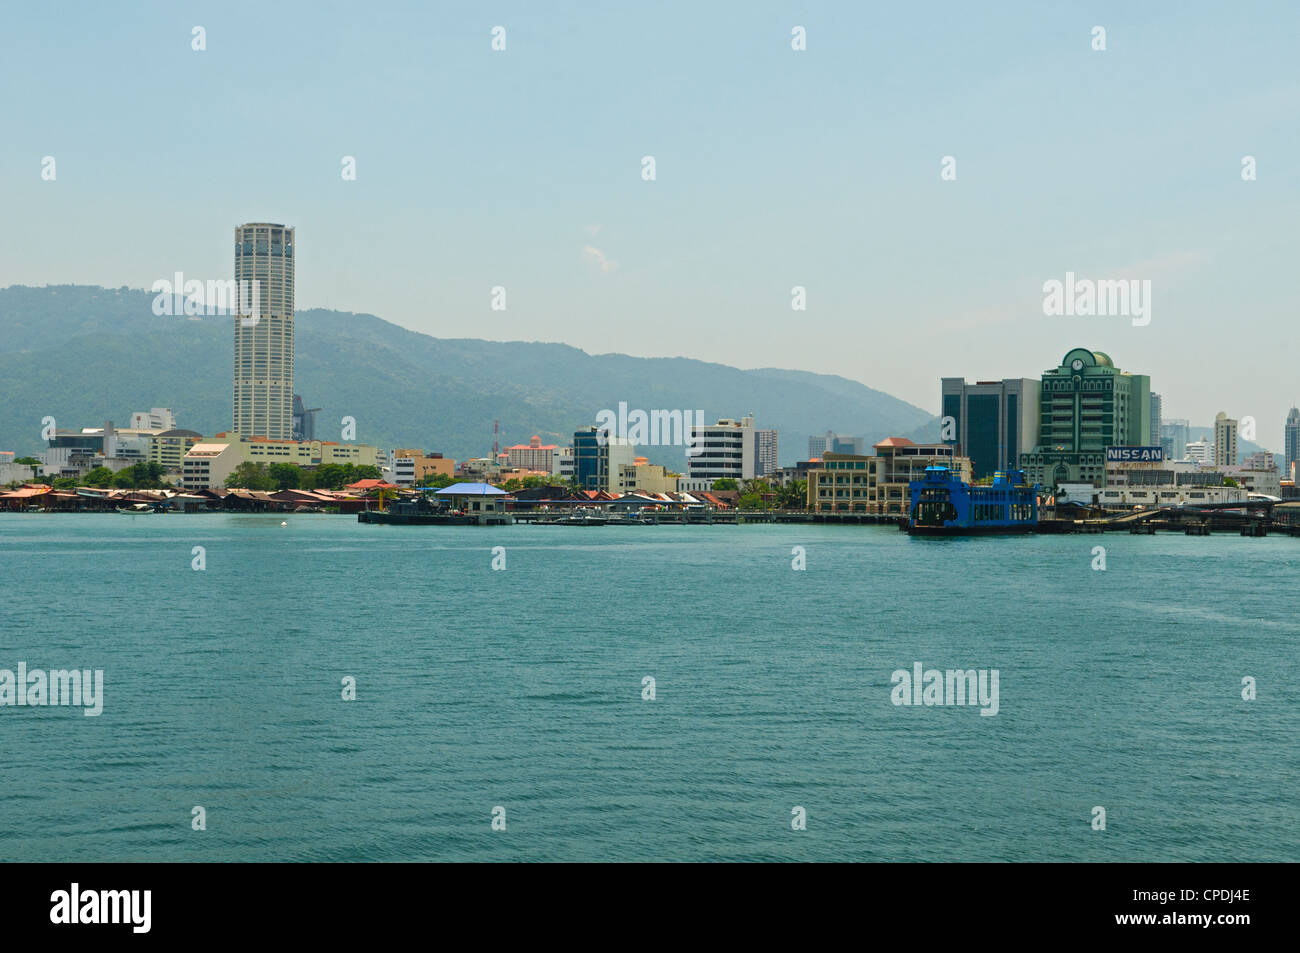 view of Komtar Tower and the city of Georgetown, Penang, Malaysia Stock Photo